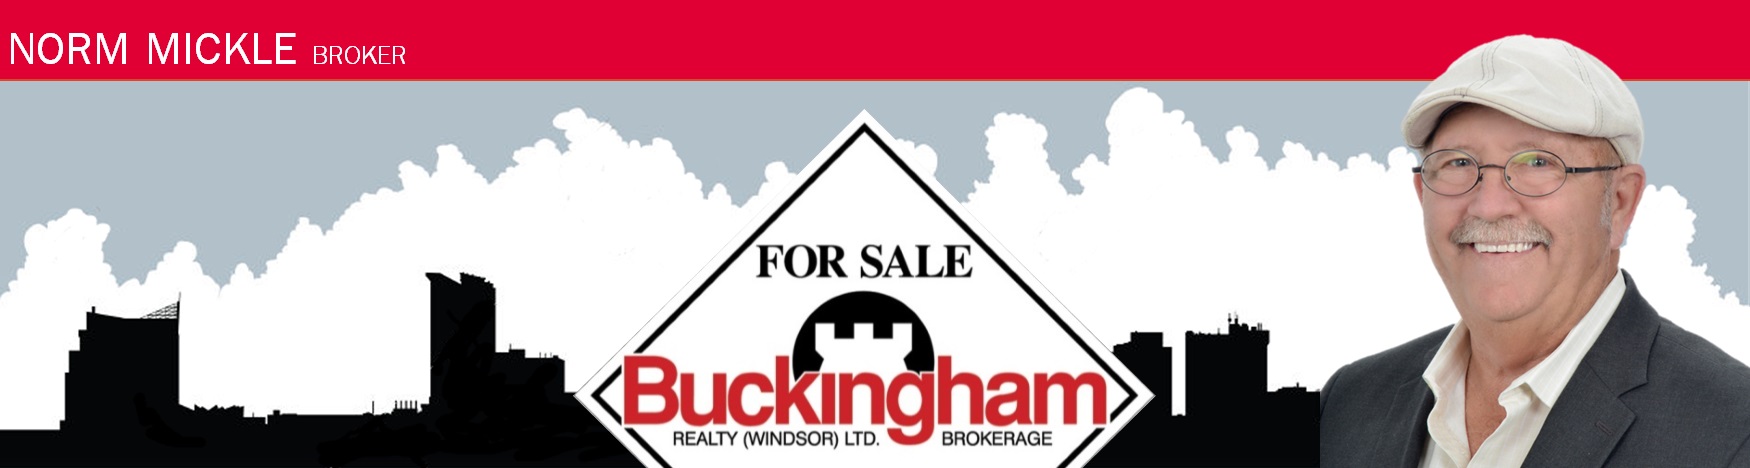 Norm Mickle - Buckingham Realty